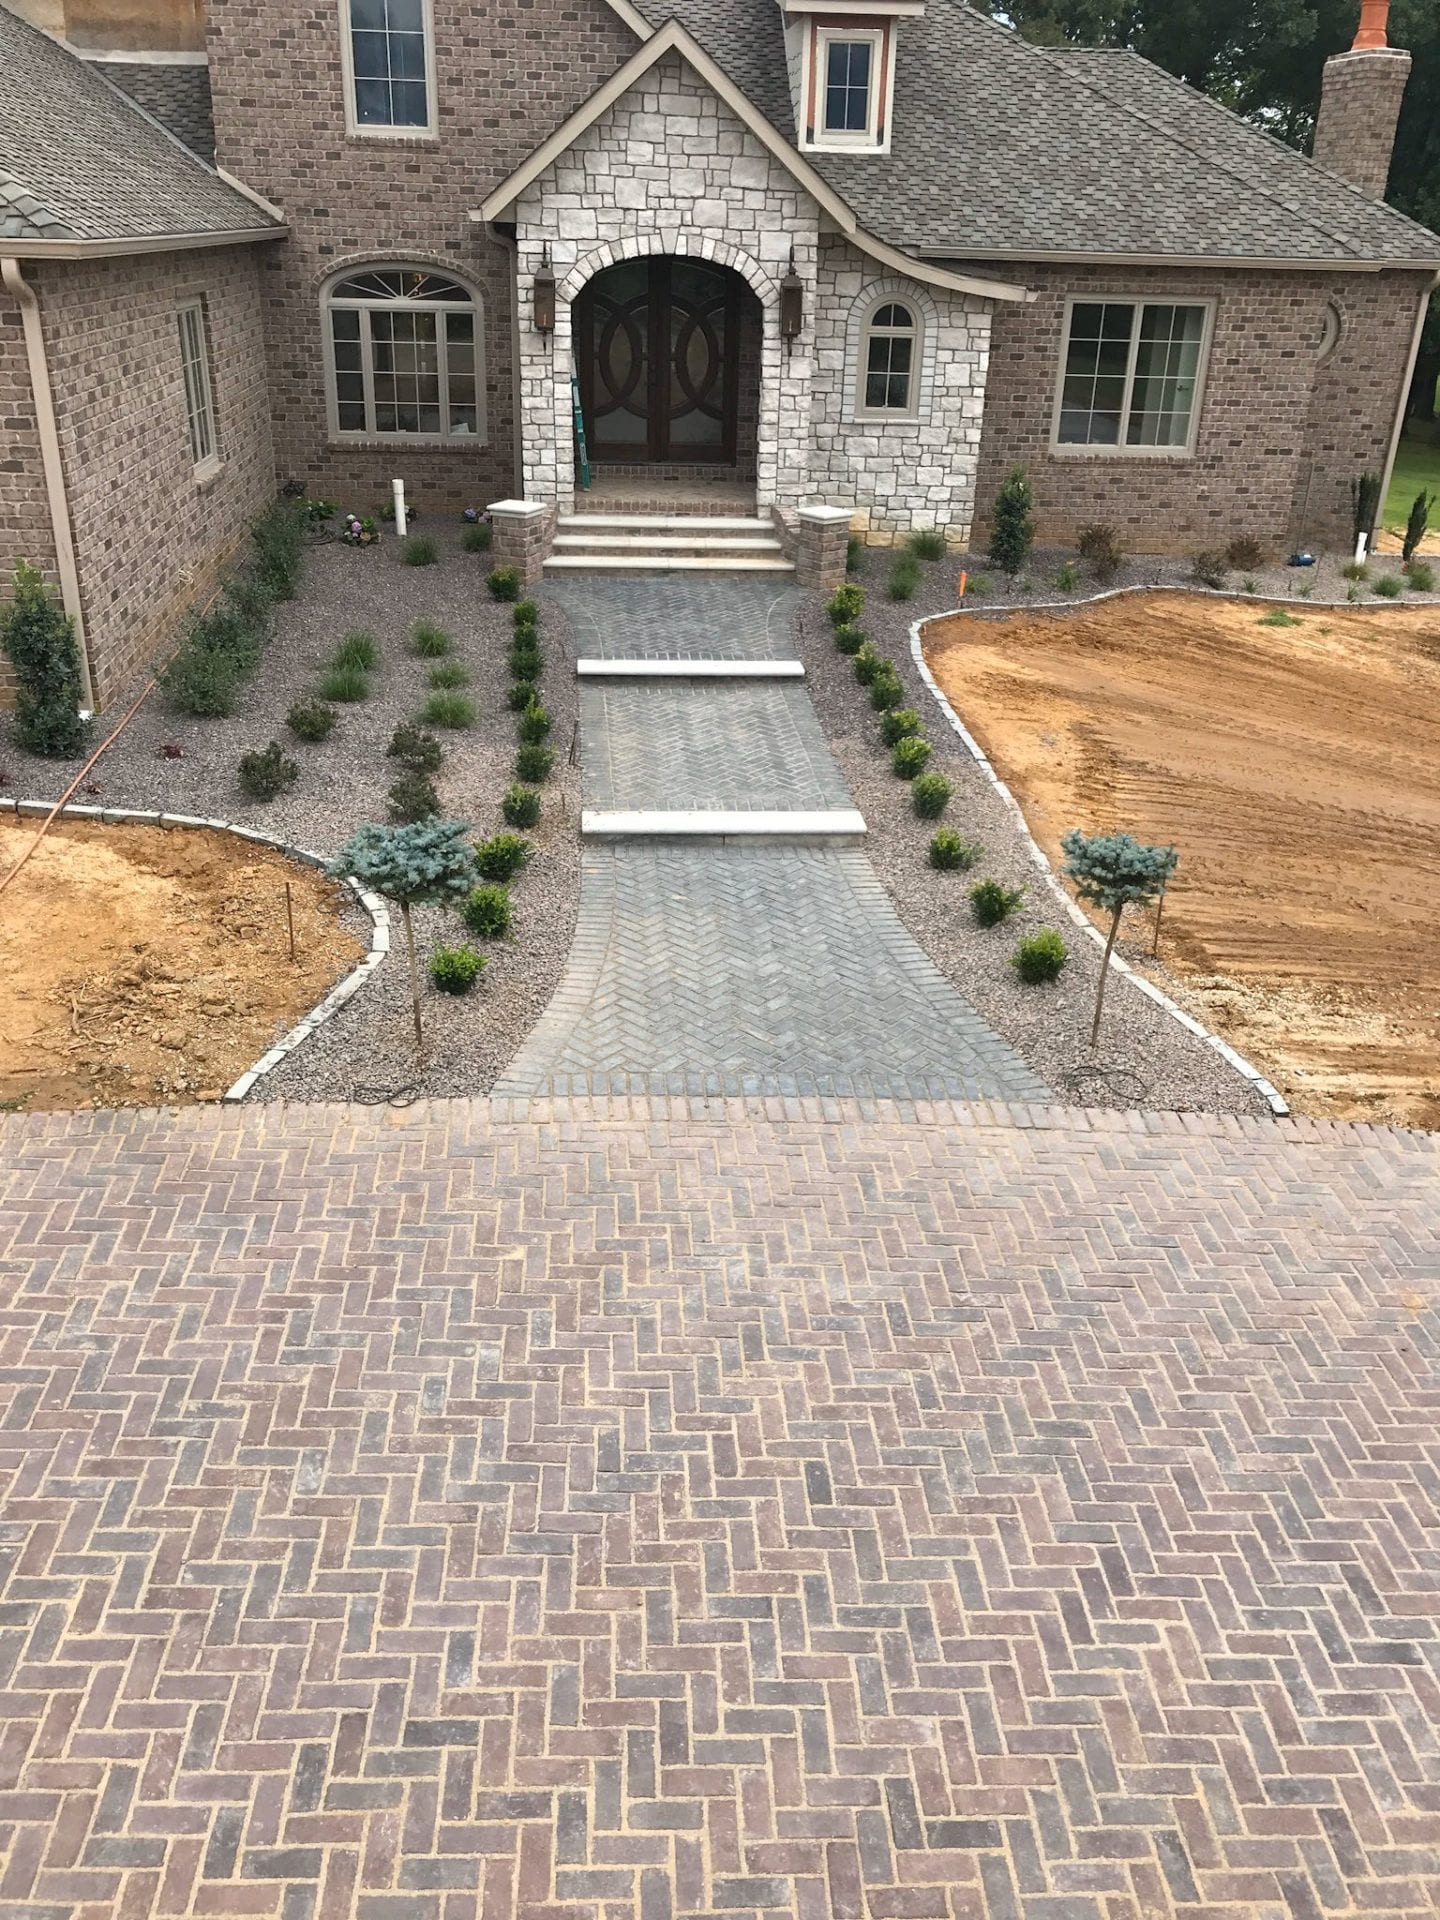 Large paver driveway and front sidewalk